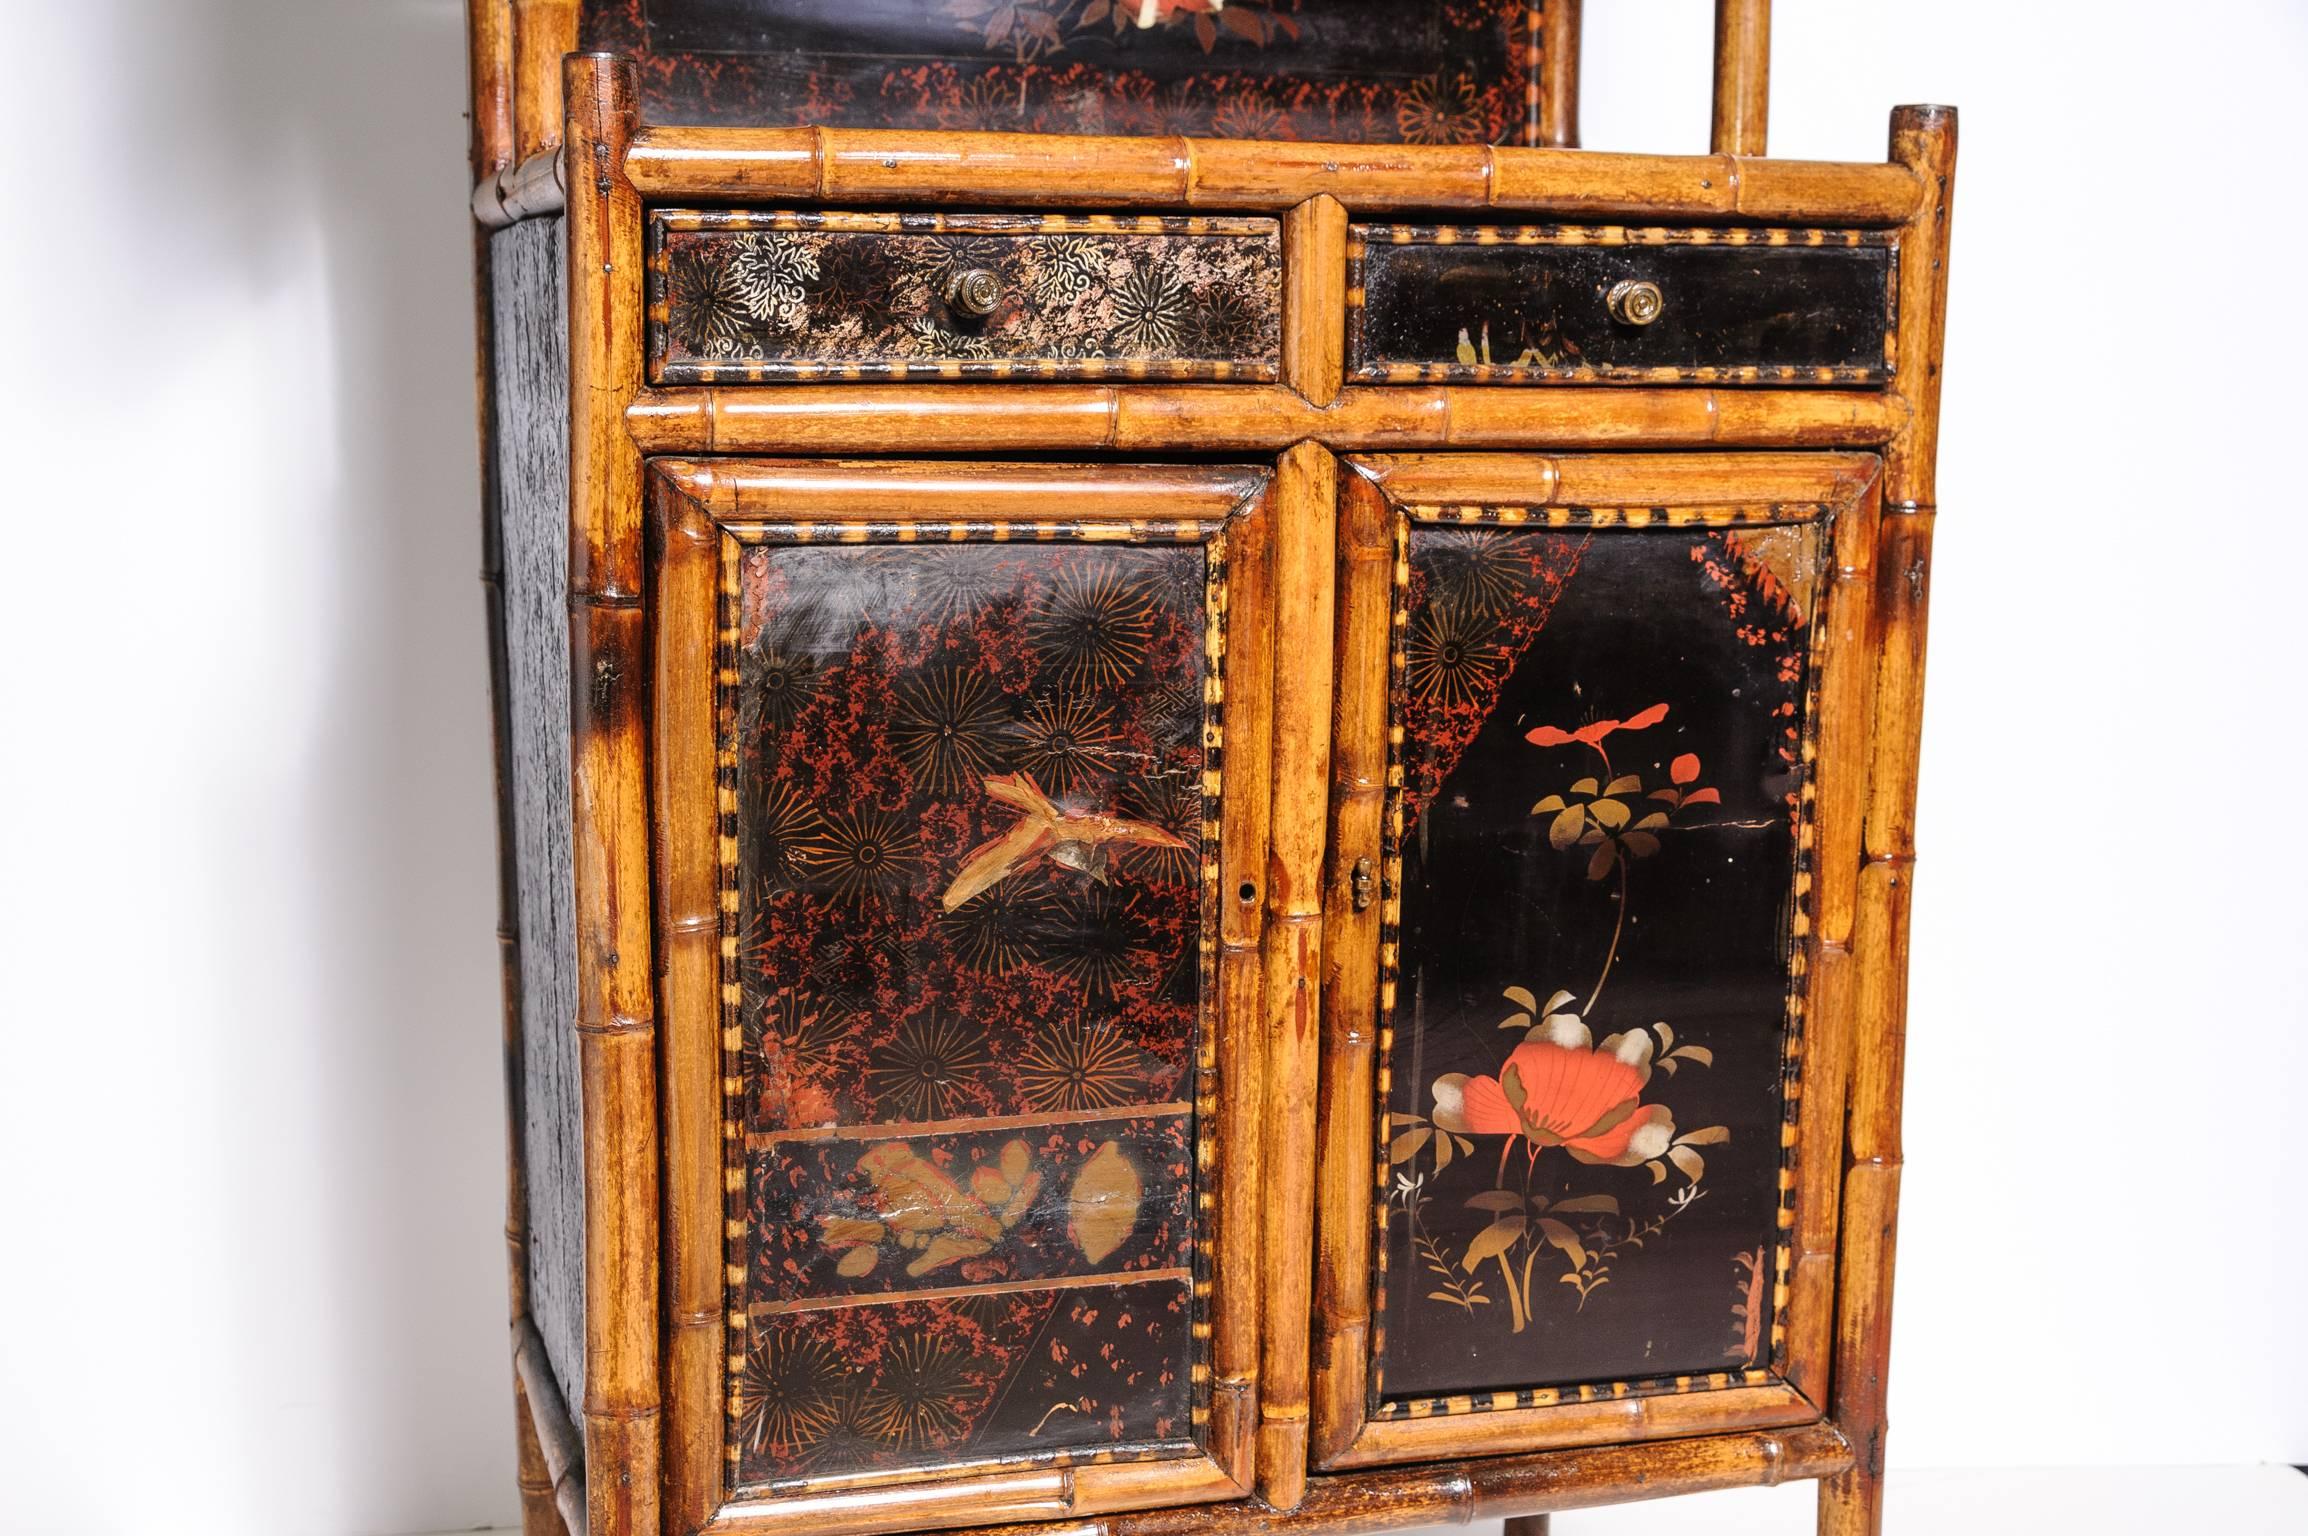 Unusual form with "Tray" top and original lacquer work, bold beautiful details and proportions.